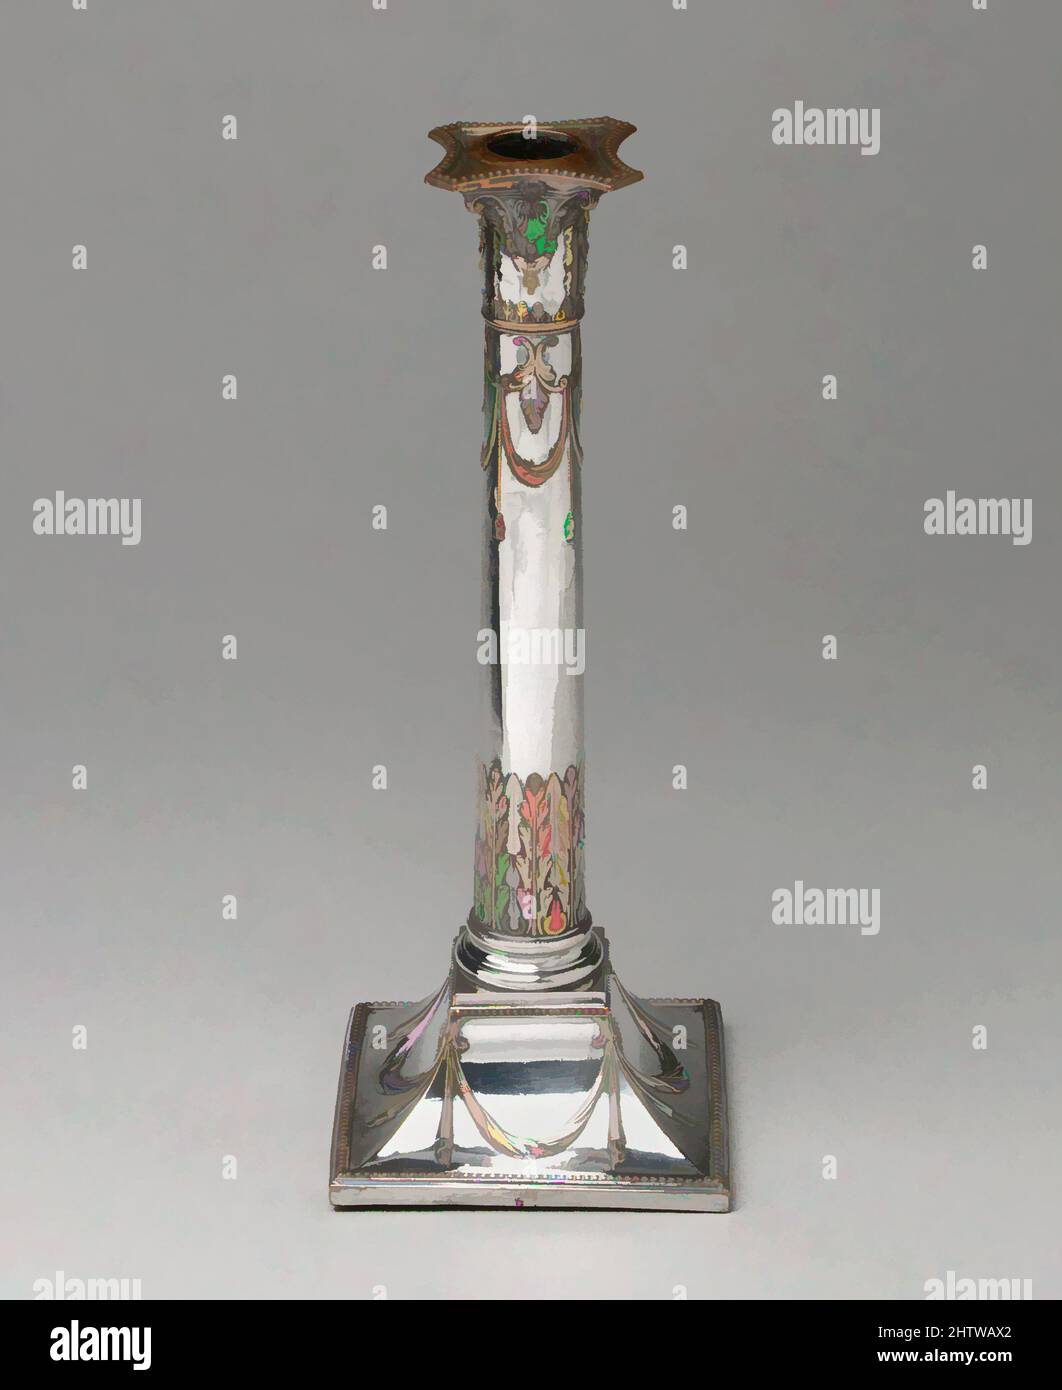 Art inspired by Candlestick (one of a pair), ca. 1775–80, British, Sheffield plate, Height: 12 1/4 in. (31.1 cm), Metalwork-Silverplate, Classic works modernized by Artotop with a splash of modernity. Shapes, color and value, eye-catching visual impact on art. Emotions through freedom of artworks in a contemporary way. A timeless message pursuing a wildly creative new direction. Artists turning to the digital medium and creating the Artotop NFT Stock Photo